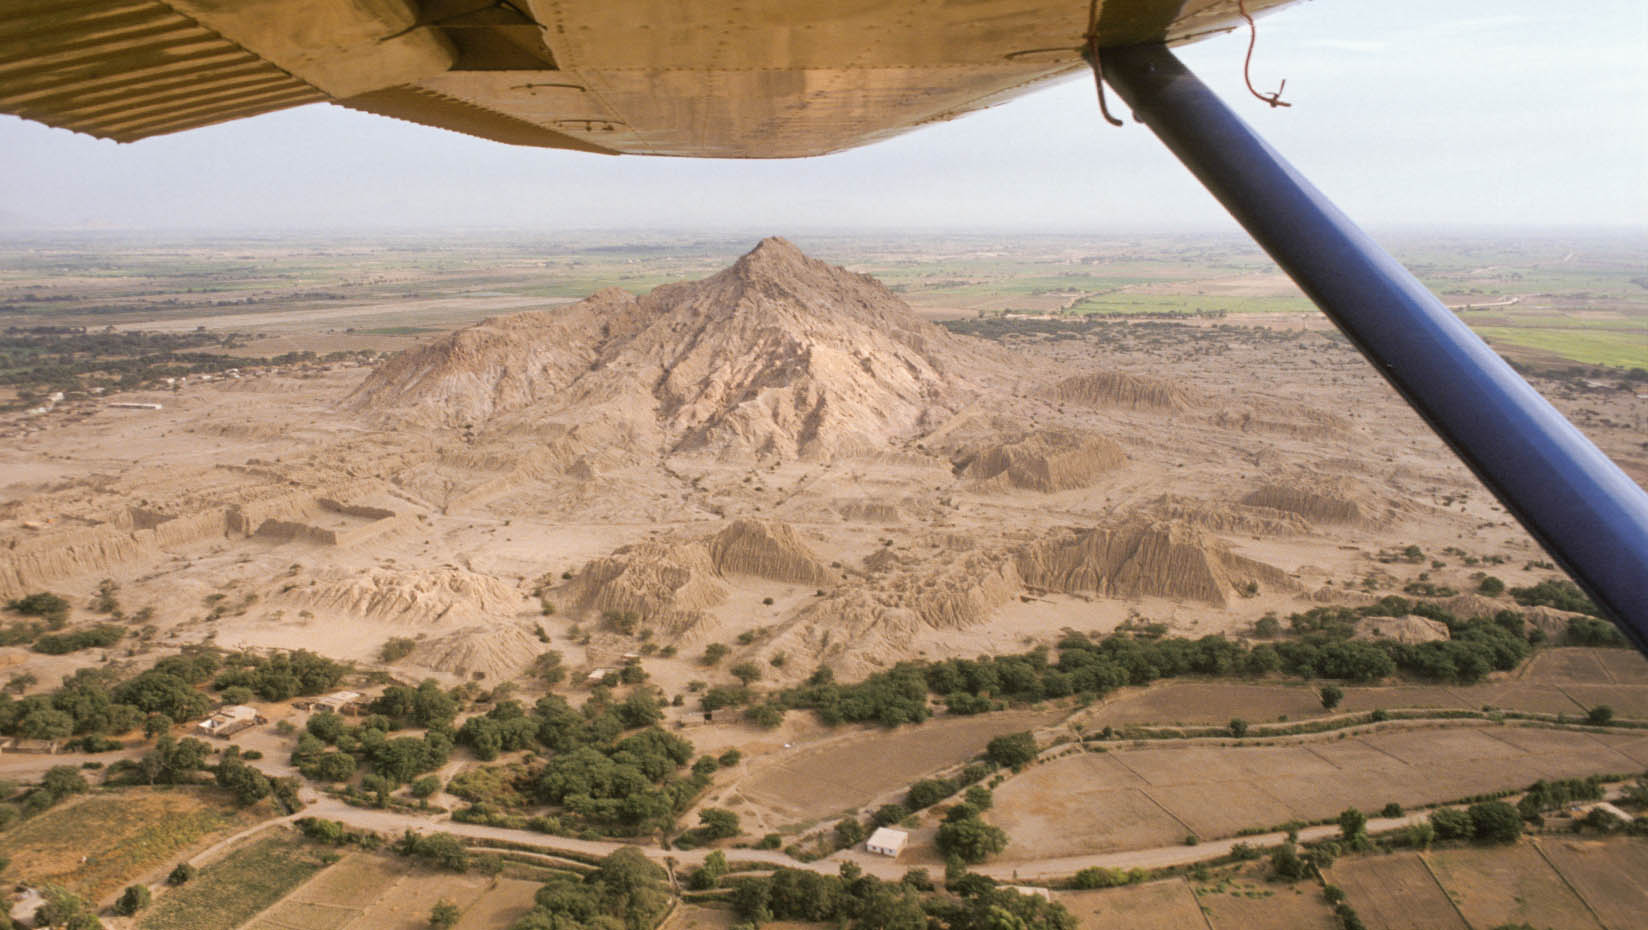 An aerial photo of Túcume in Peru, America’s largest pyramid center